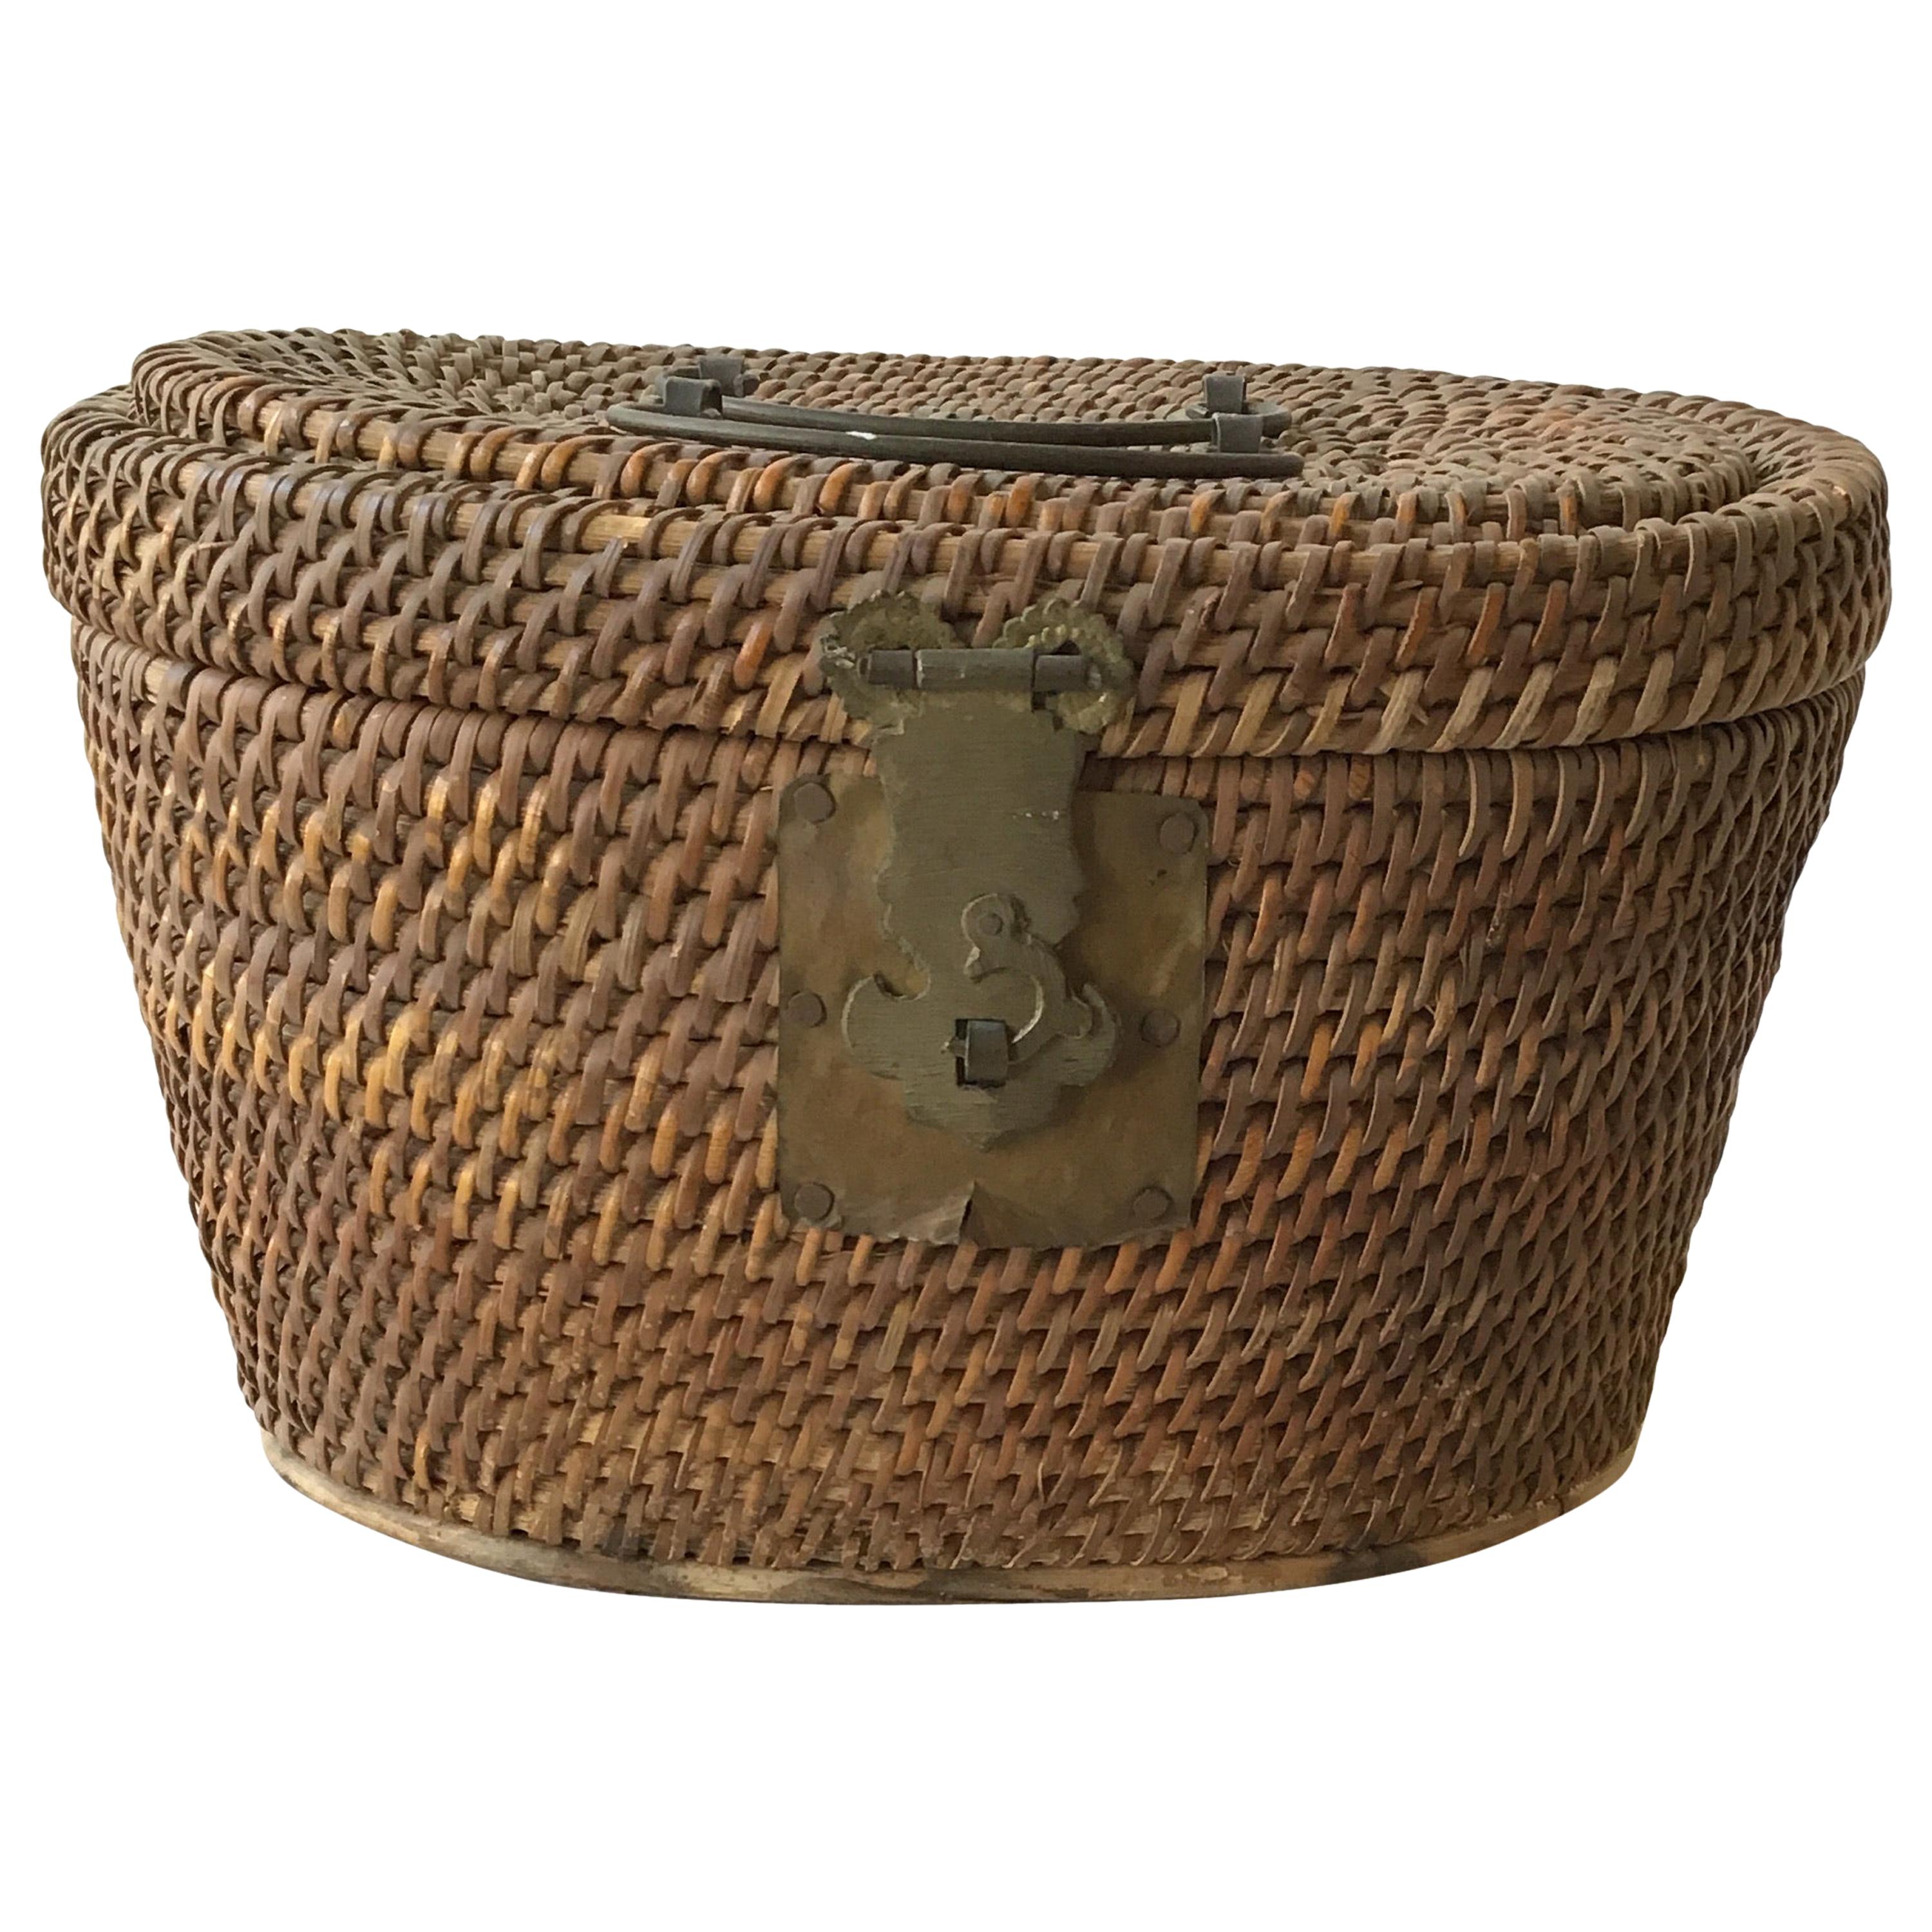 1920s Chinese Wicker and Brass Lunch Basket